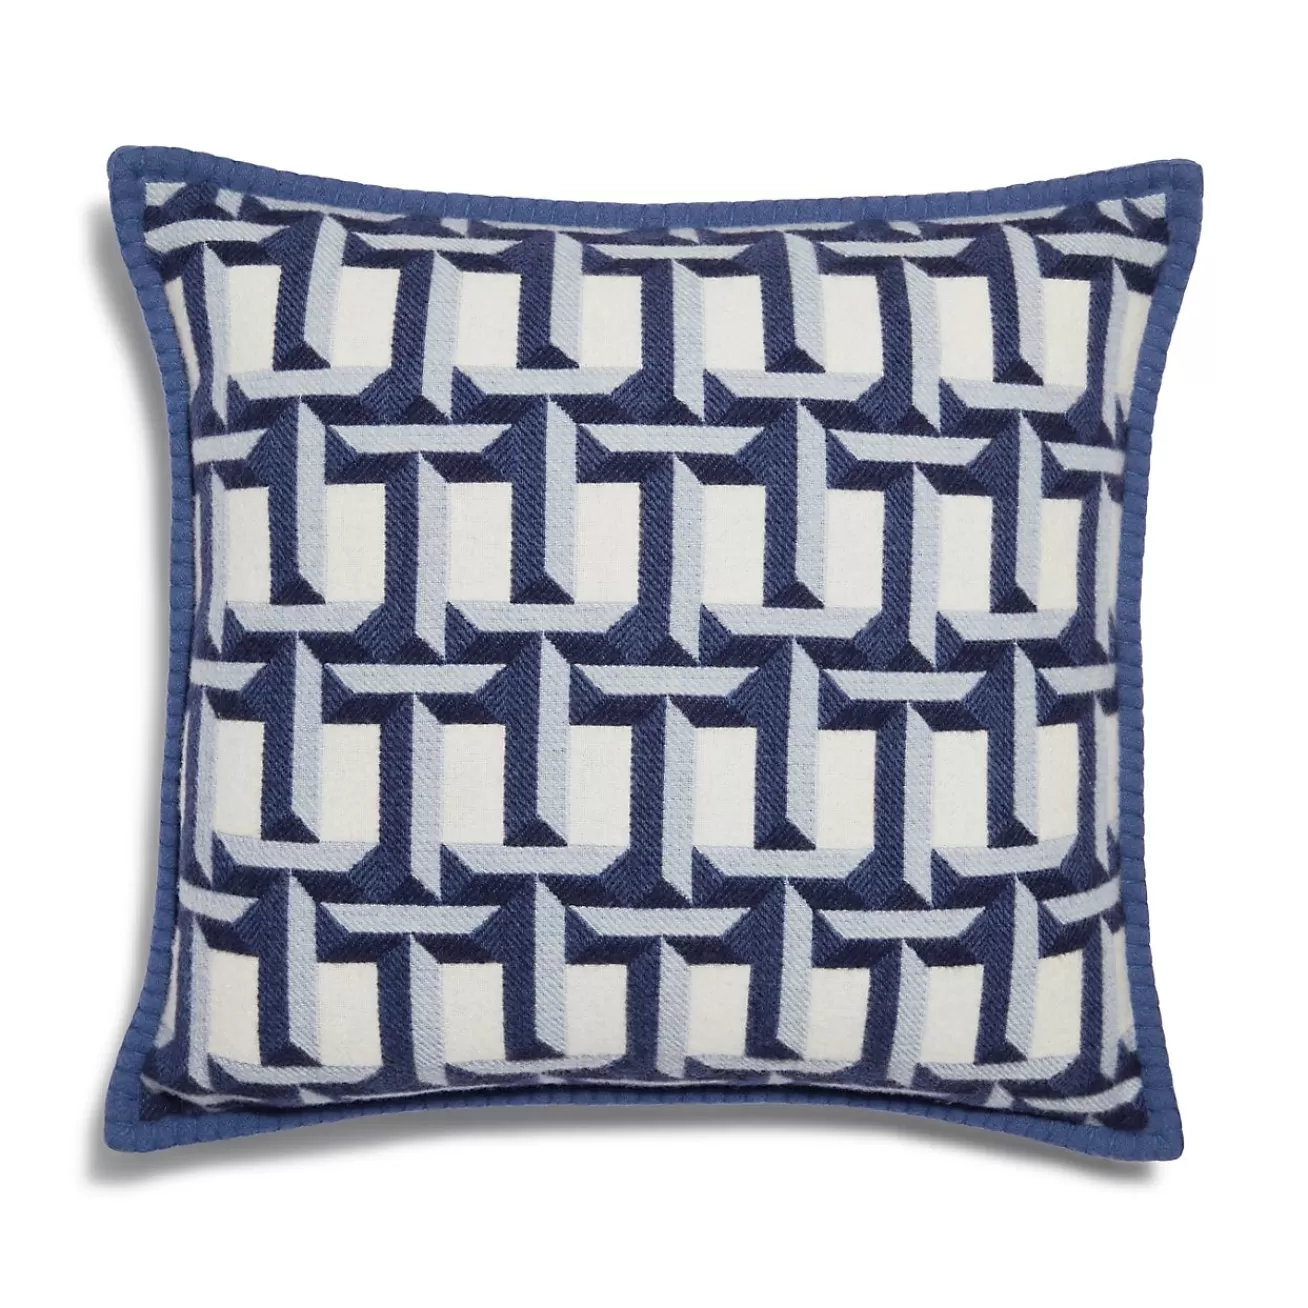 Tiffany & Co. Tiffany T True Cushion in Tanzanite-colored Wool and Cashmere | ^ The Home | Housewarming Gifts